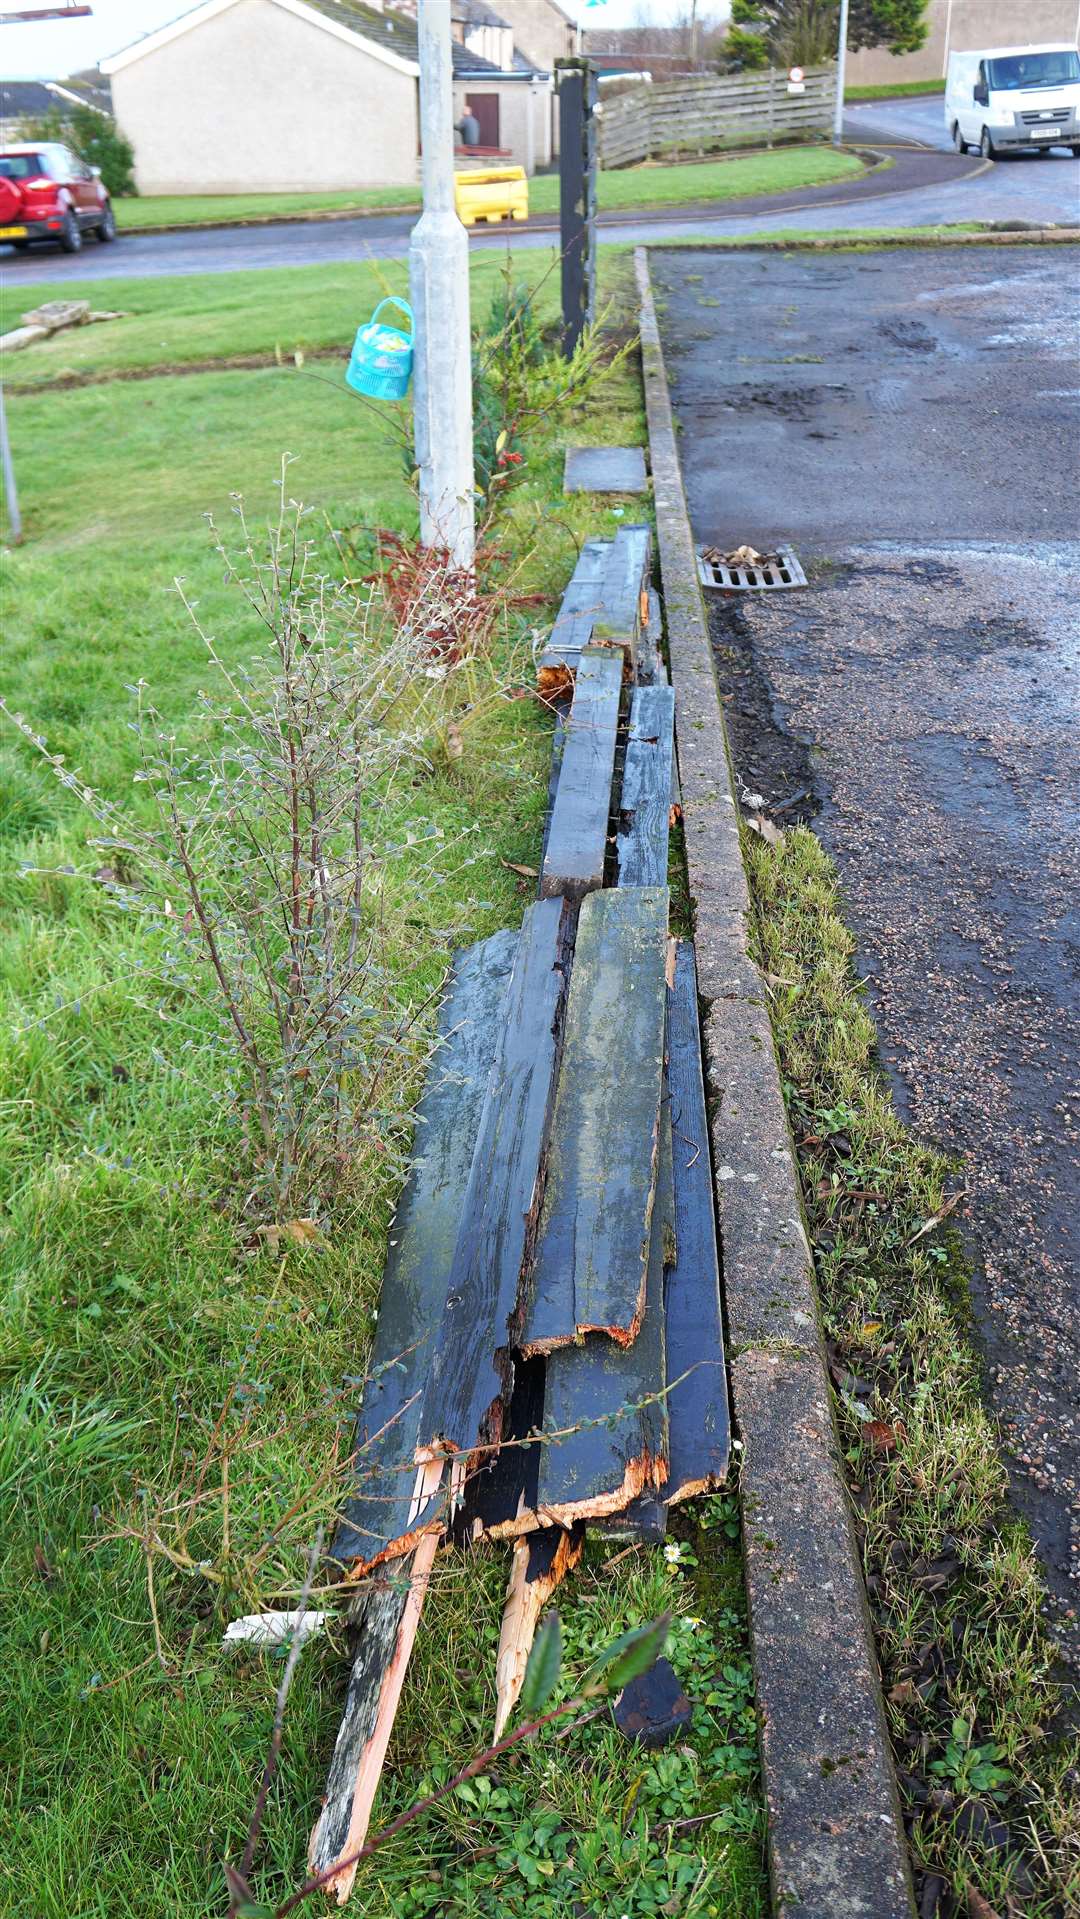 Broken pieces of the fence have lain rotting by the roadside for a number of years.